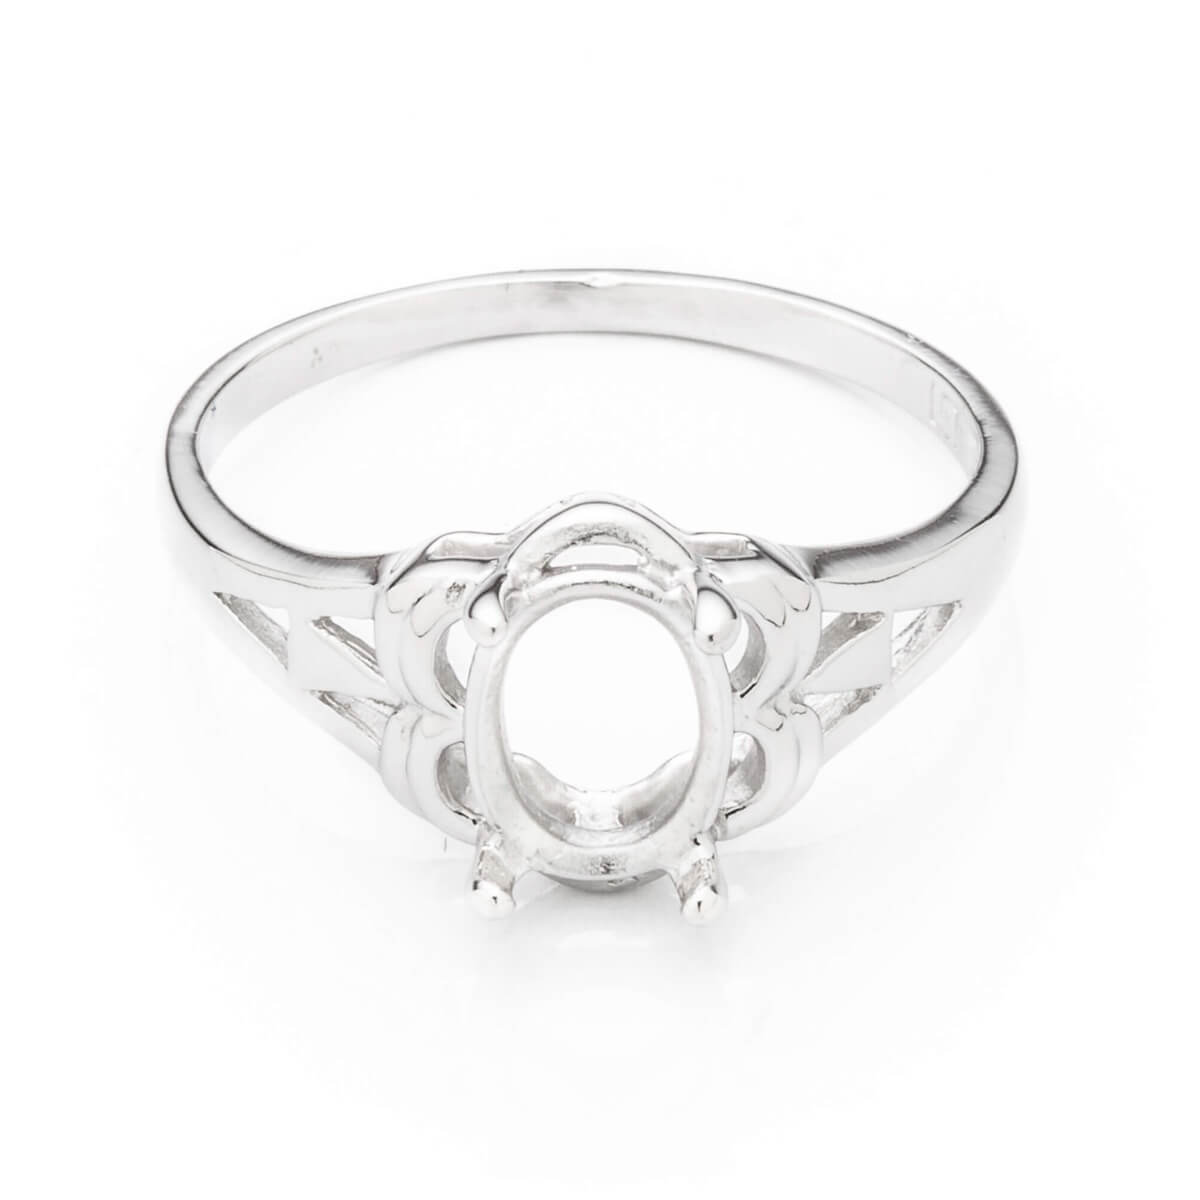 Unique Motif Ring with Oval Prongs Mounting in Sterling Silver 6x7mm 